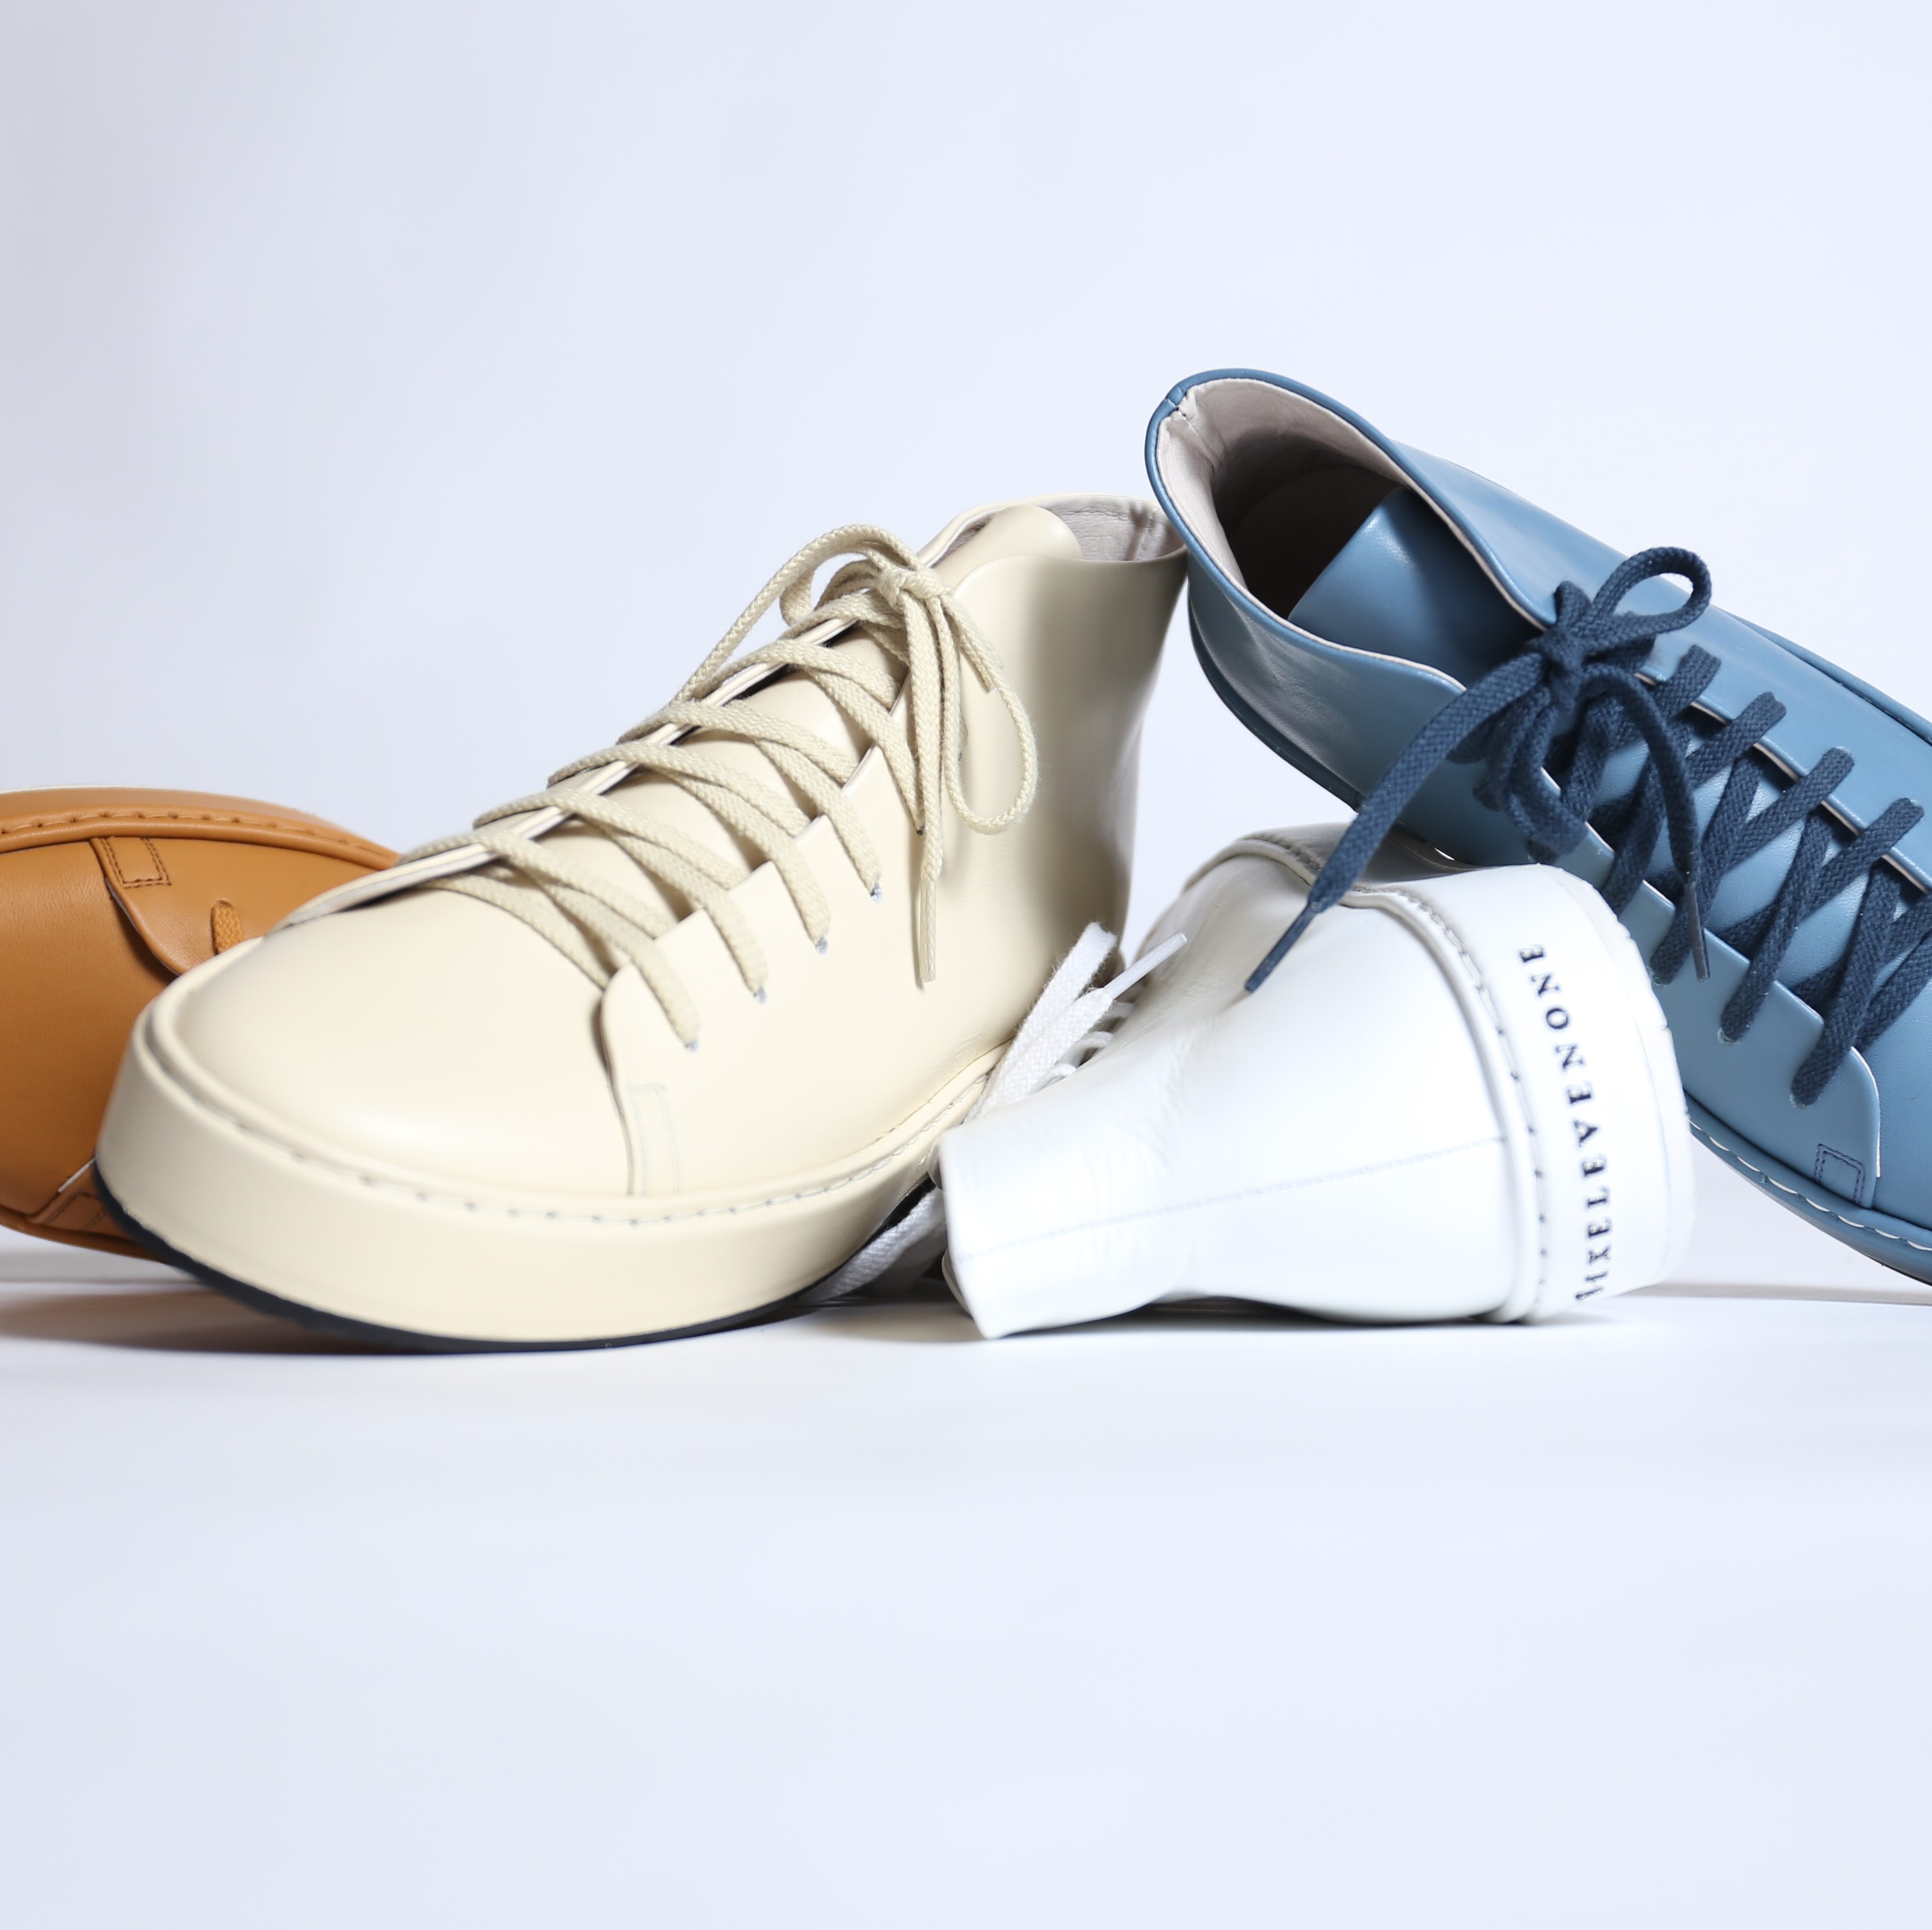 The same material sneakers｜6111 SIXELEVENONE